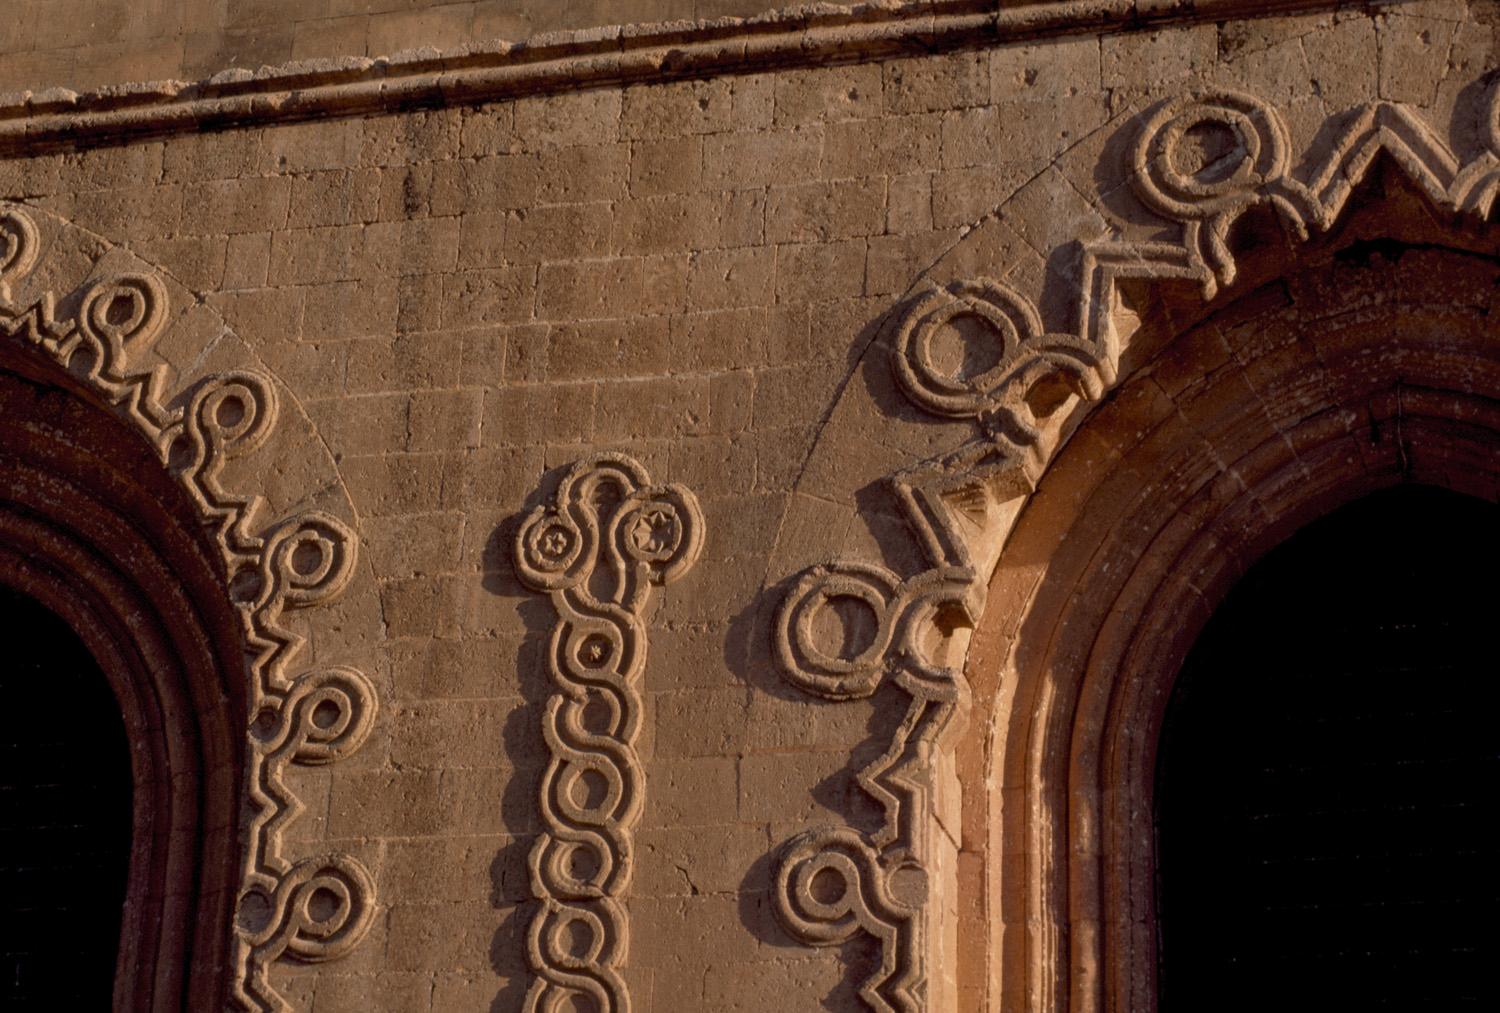 Courtyard detail; archway carved with looped string motif and chain molding in between